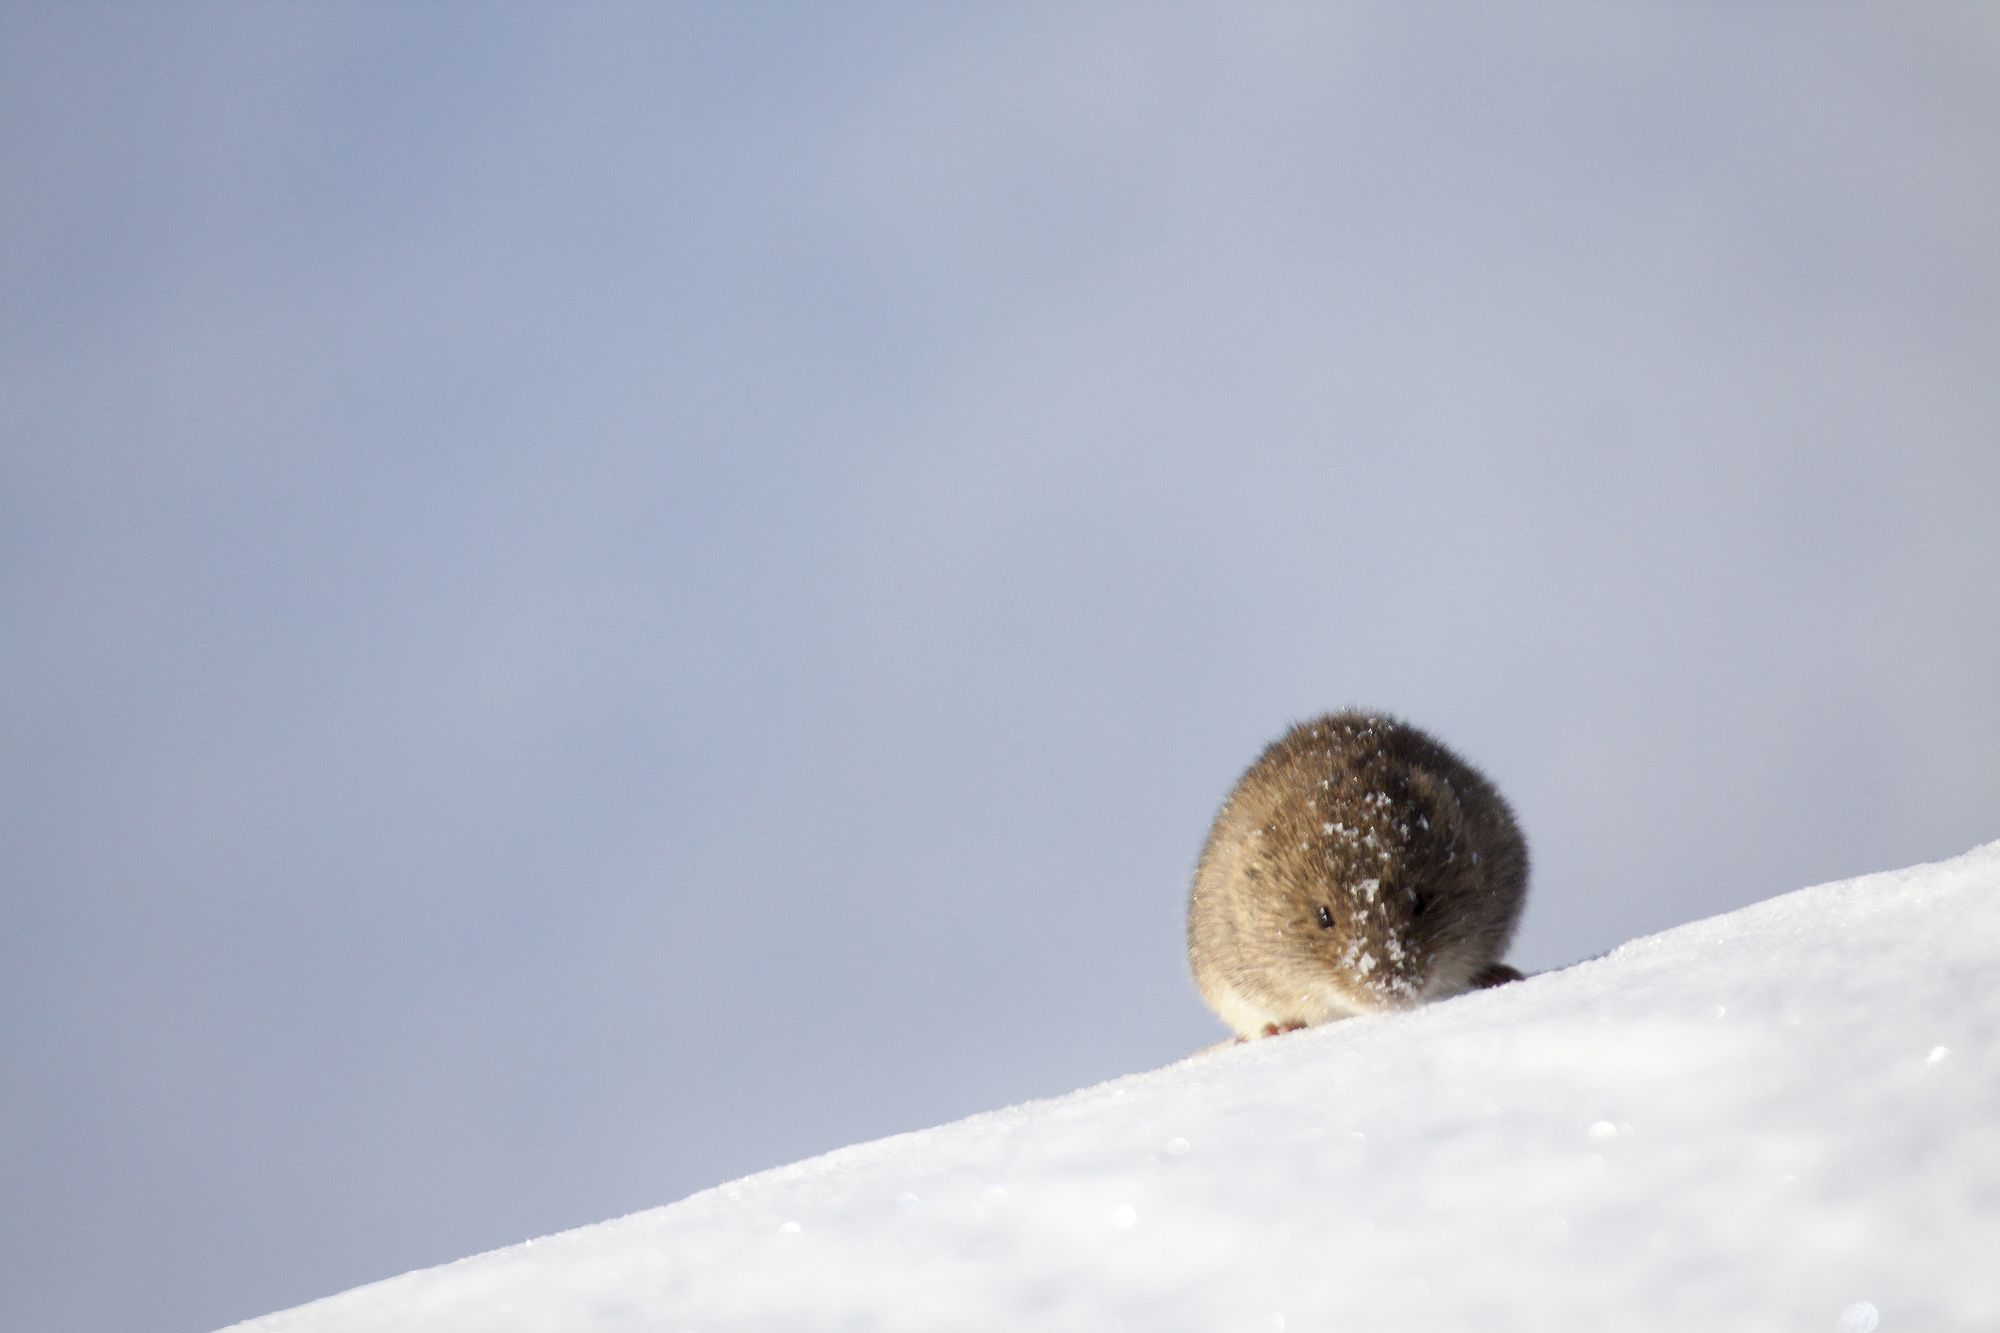 Voles are just some of the winter residents of this exclusive ecosystem.